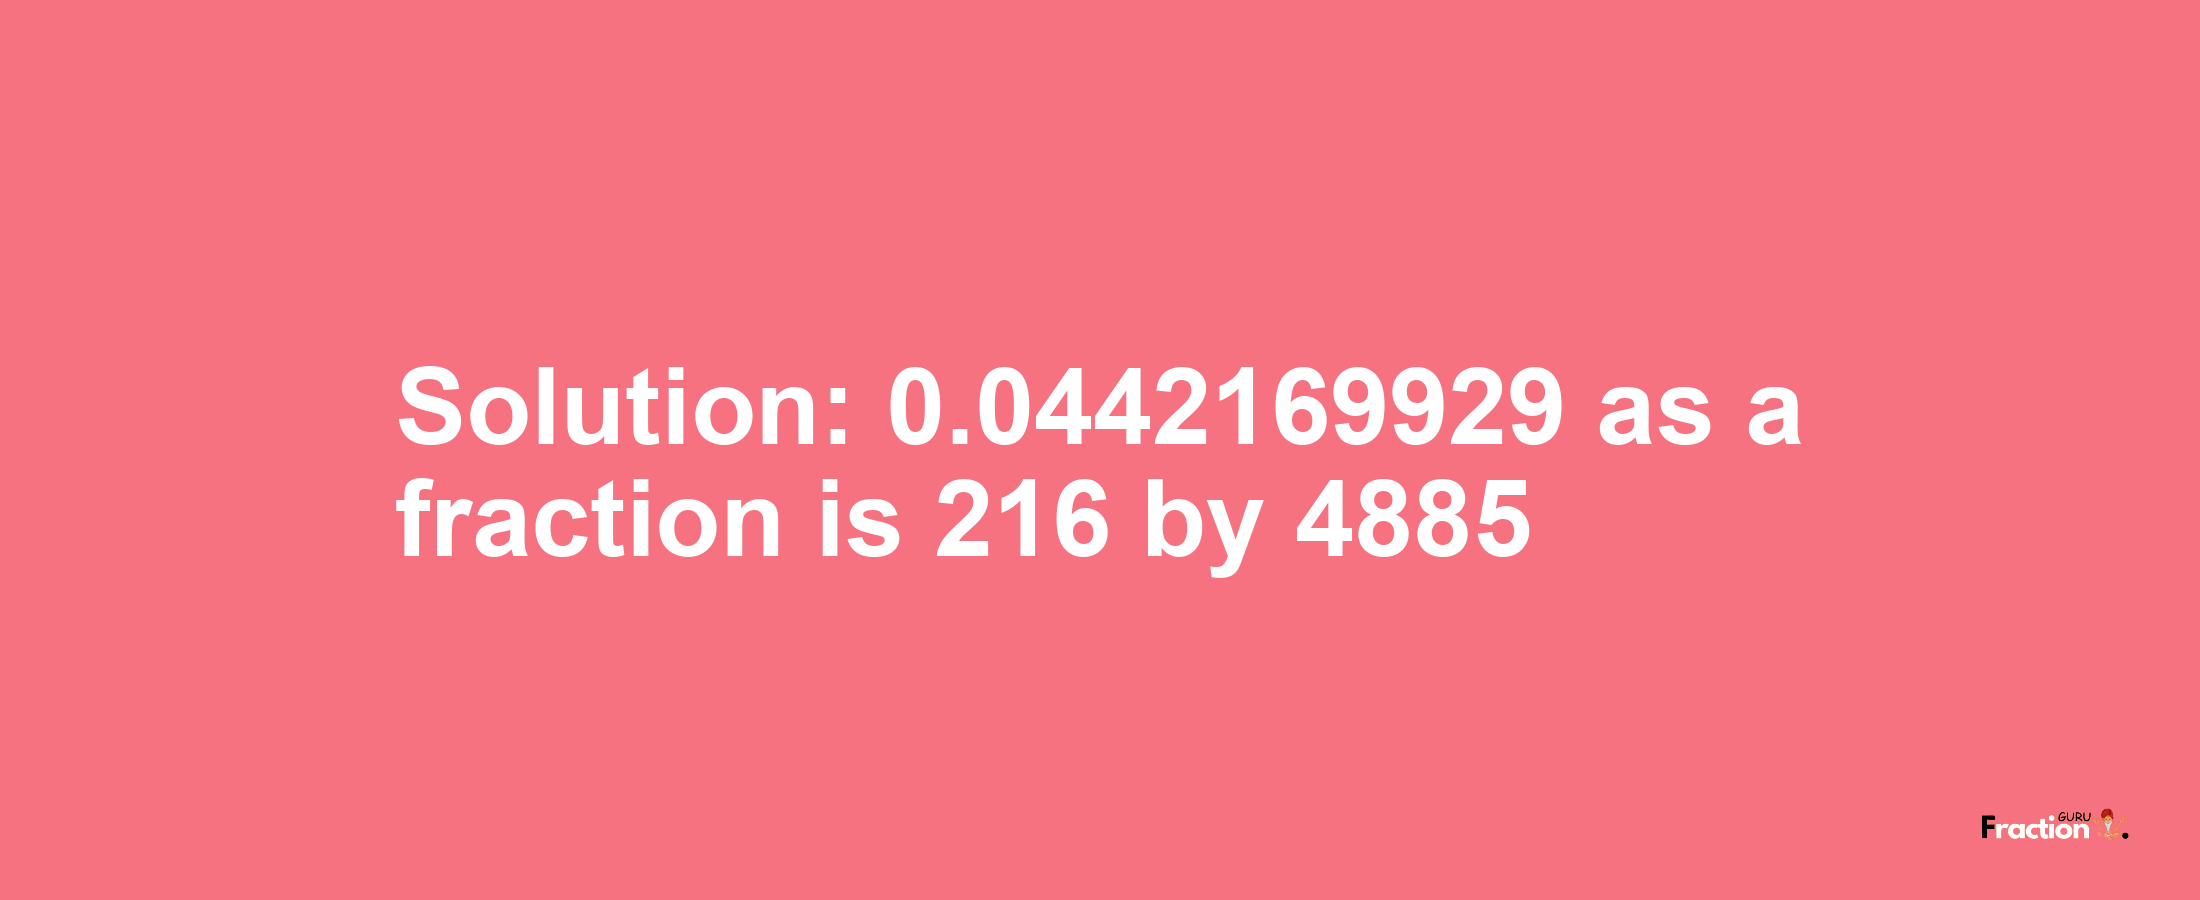 Solution:0.0442169929 as a fraction is 216/4885